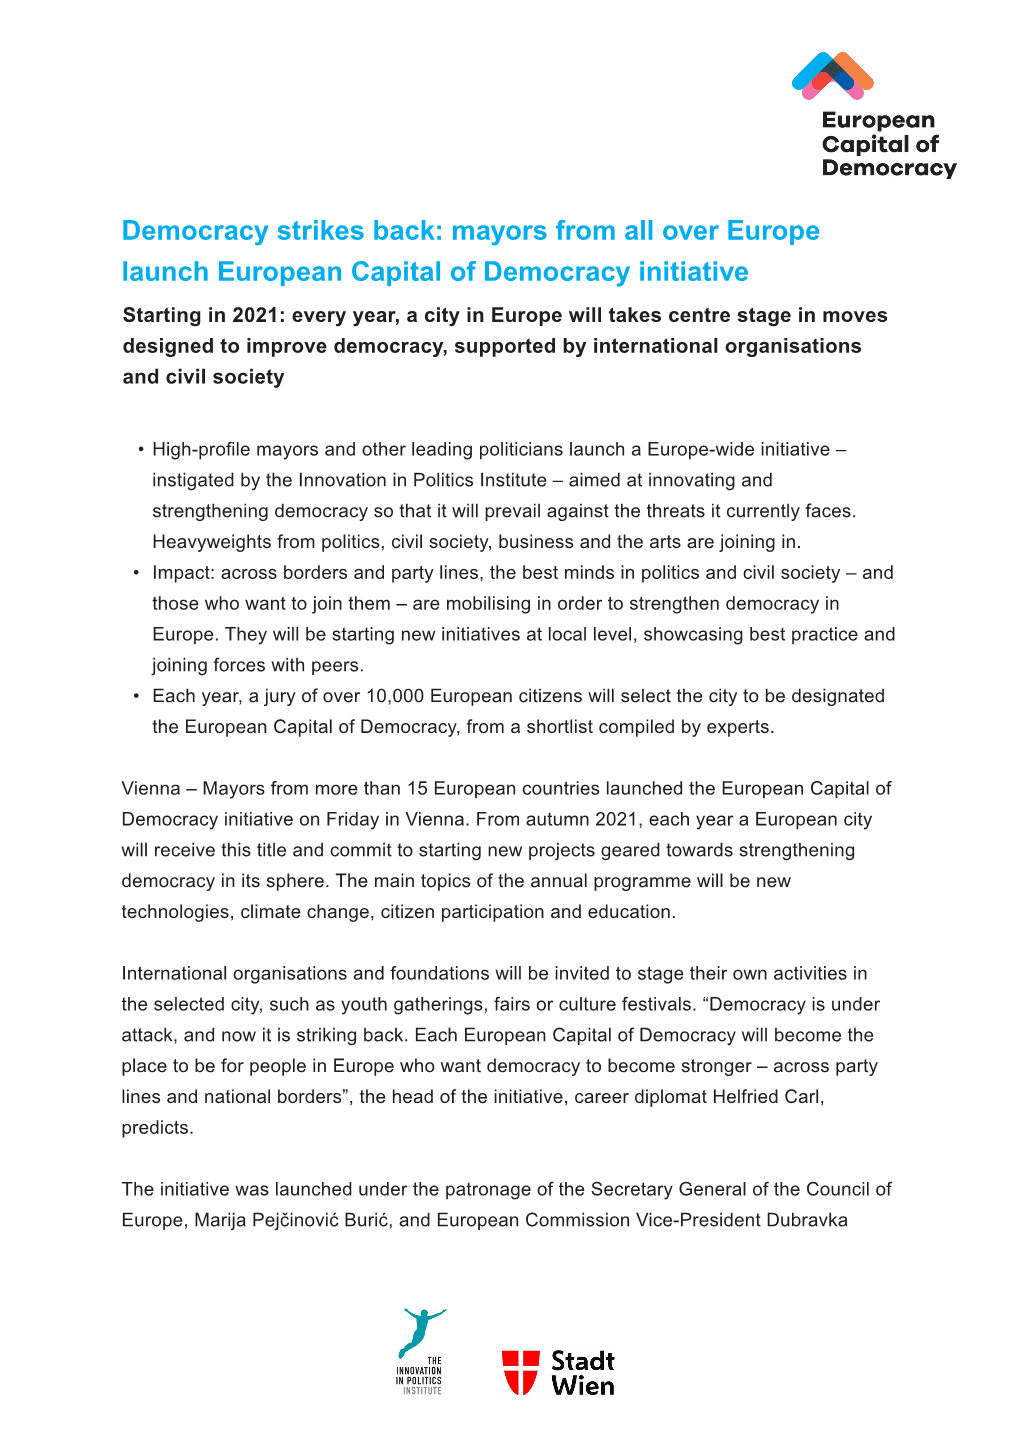 Mayors from All Over Europe Launch European Capital of Democracy Initiative